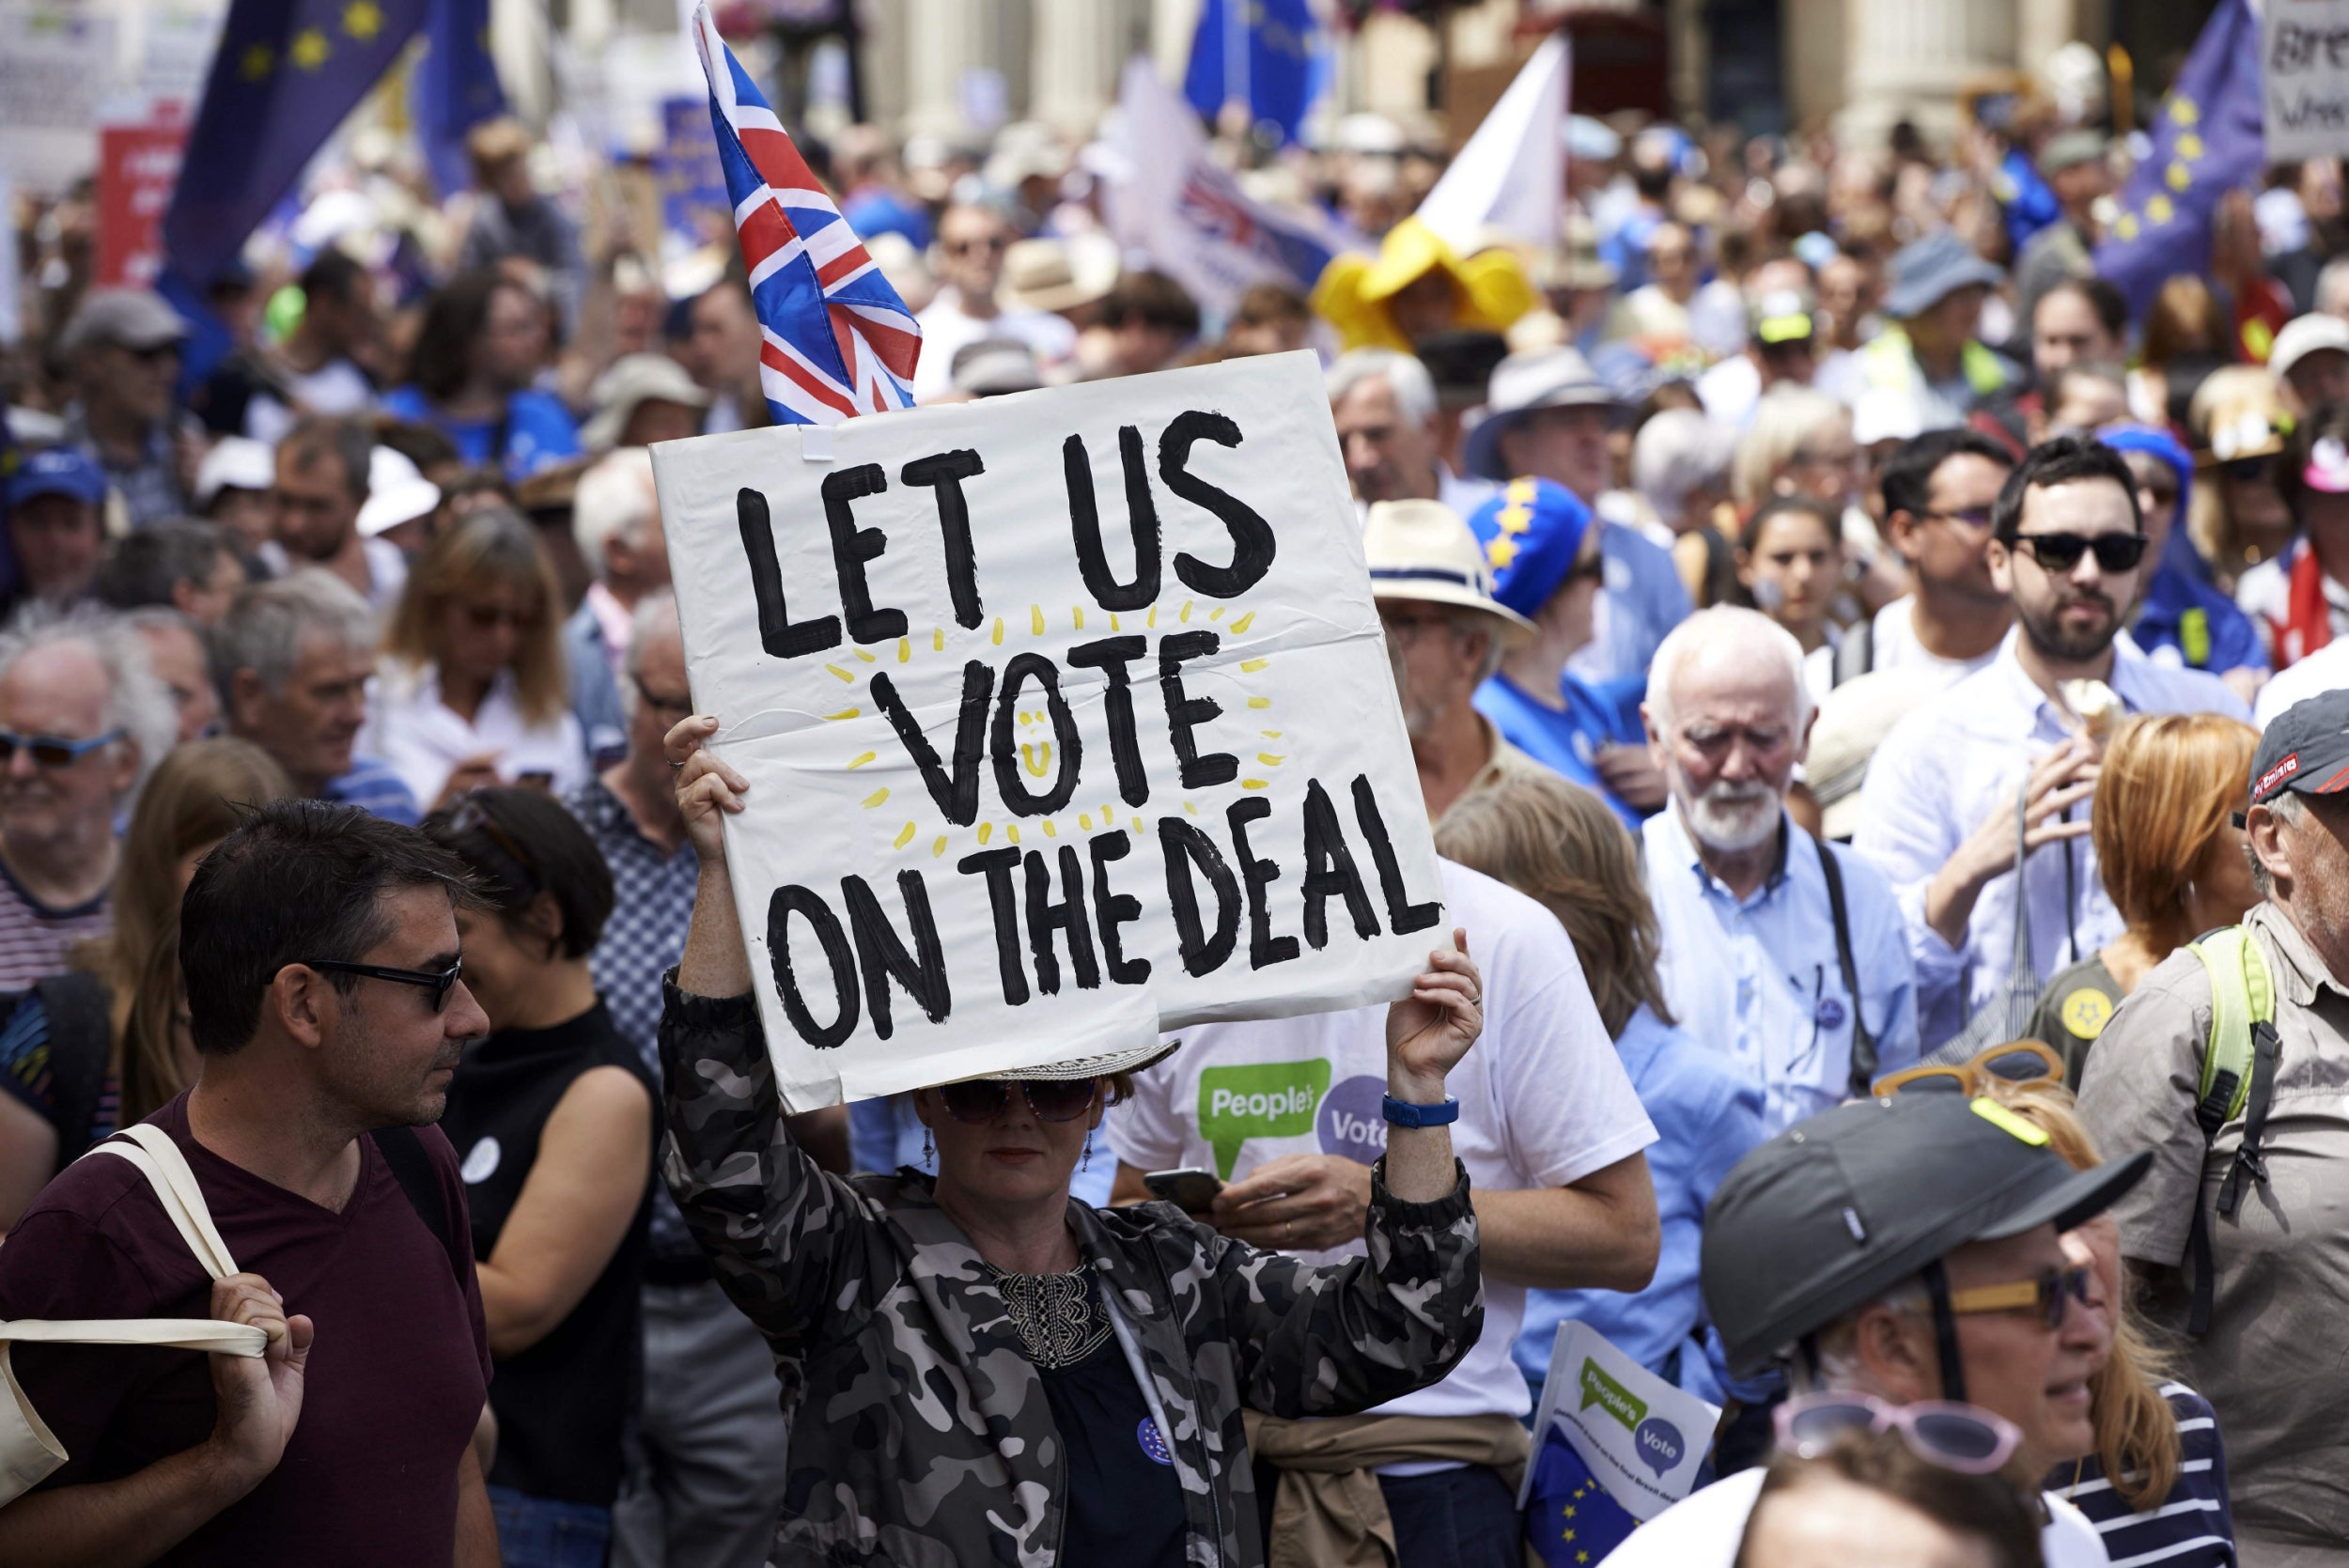 Brexit: Second referendum now most likely scenario, according to bookmaker